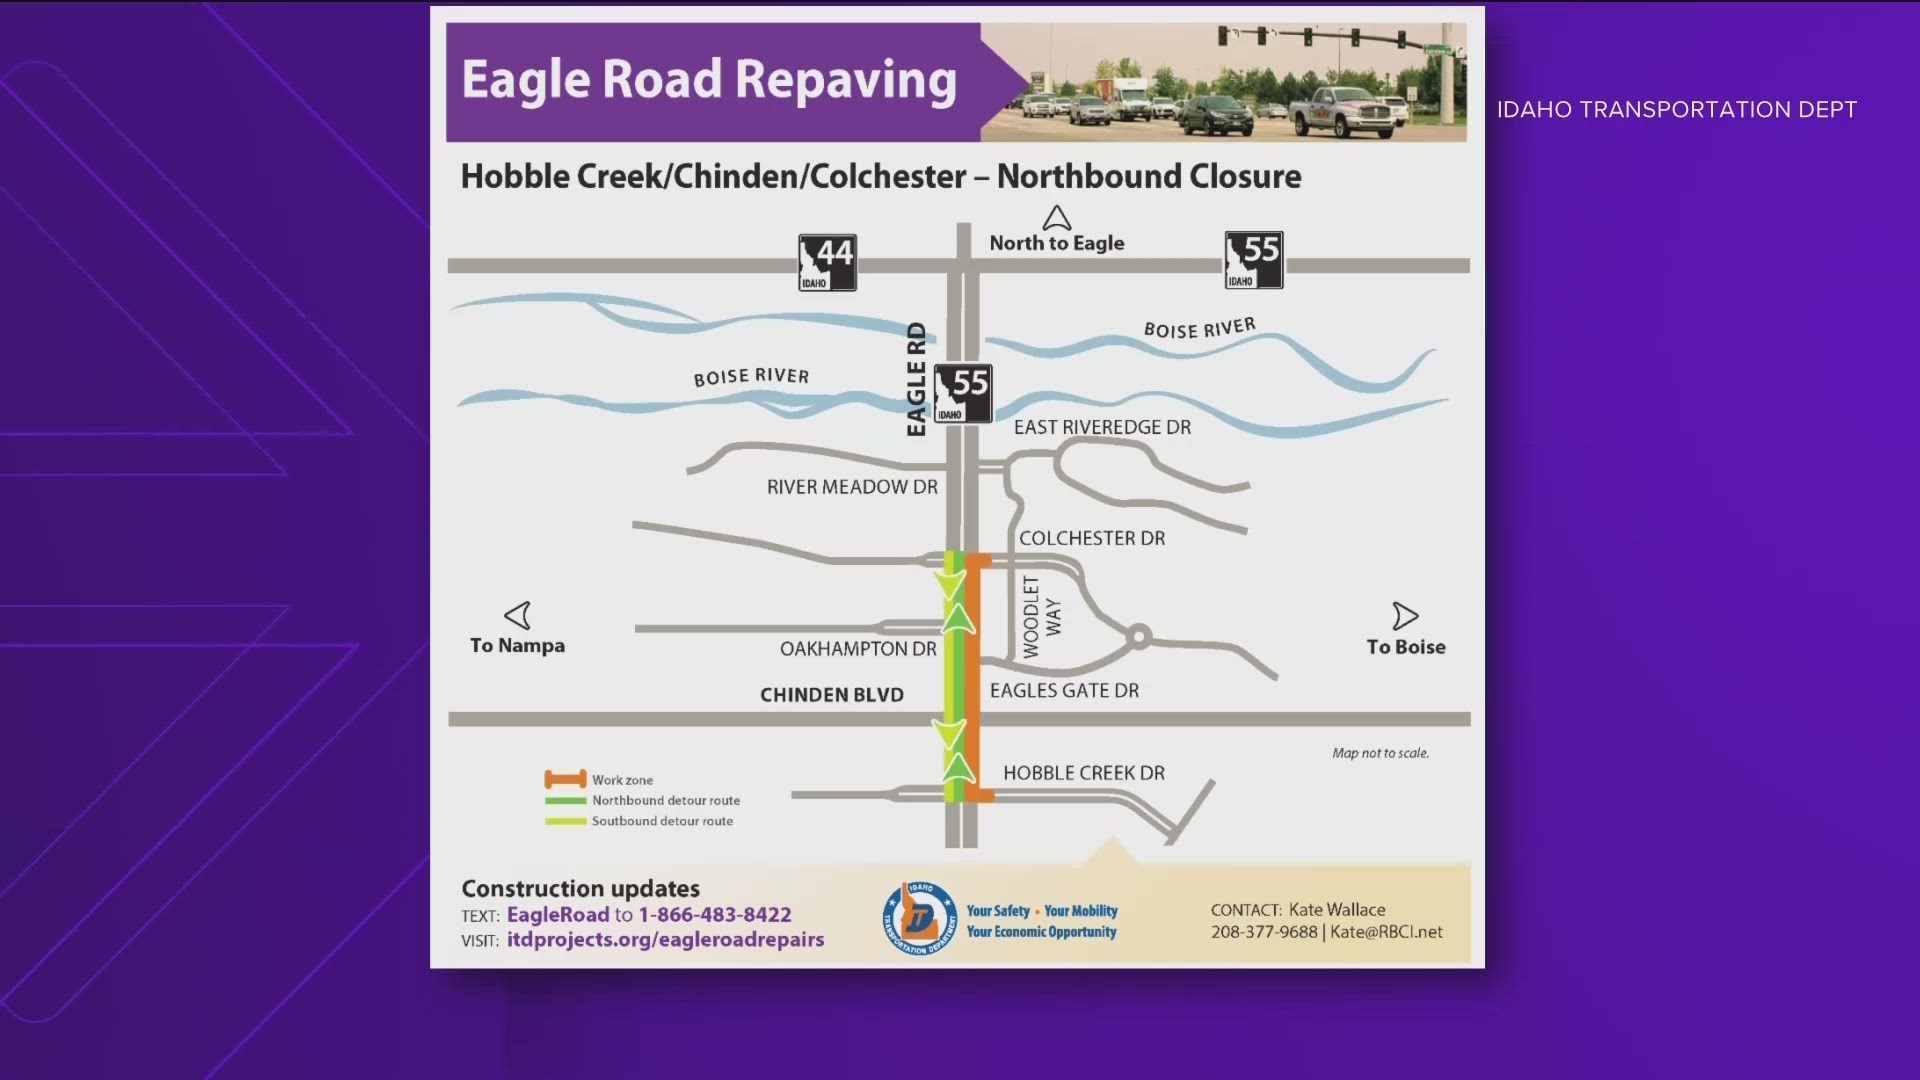 Idaho Transportation Department will begin nighttime lane and road closures on Eagle Road, as paving project starts on Chinden Boulevard and Eagle Road on May 31.